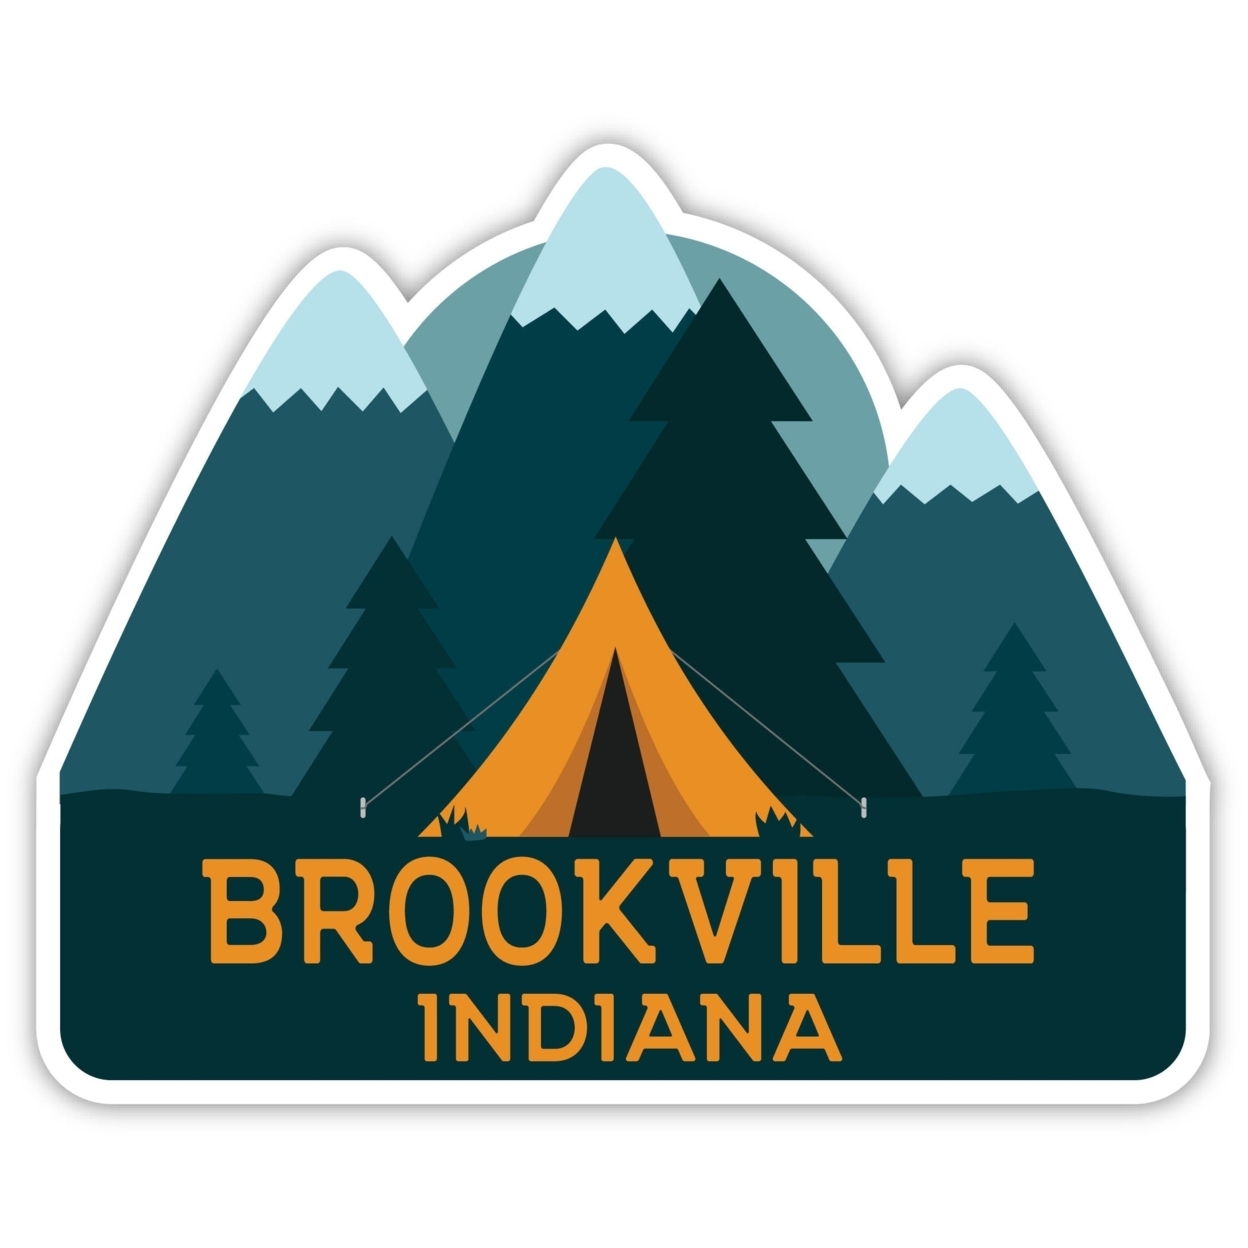 Brookville Indiana Souvenir Decorative Stickers (Choose Theme And Size) - 4-Pack, 4-Inch, Tent